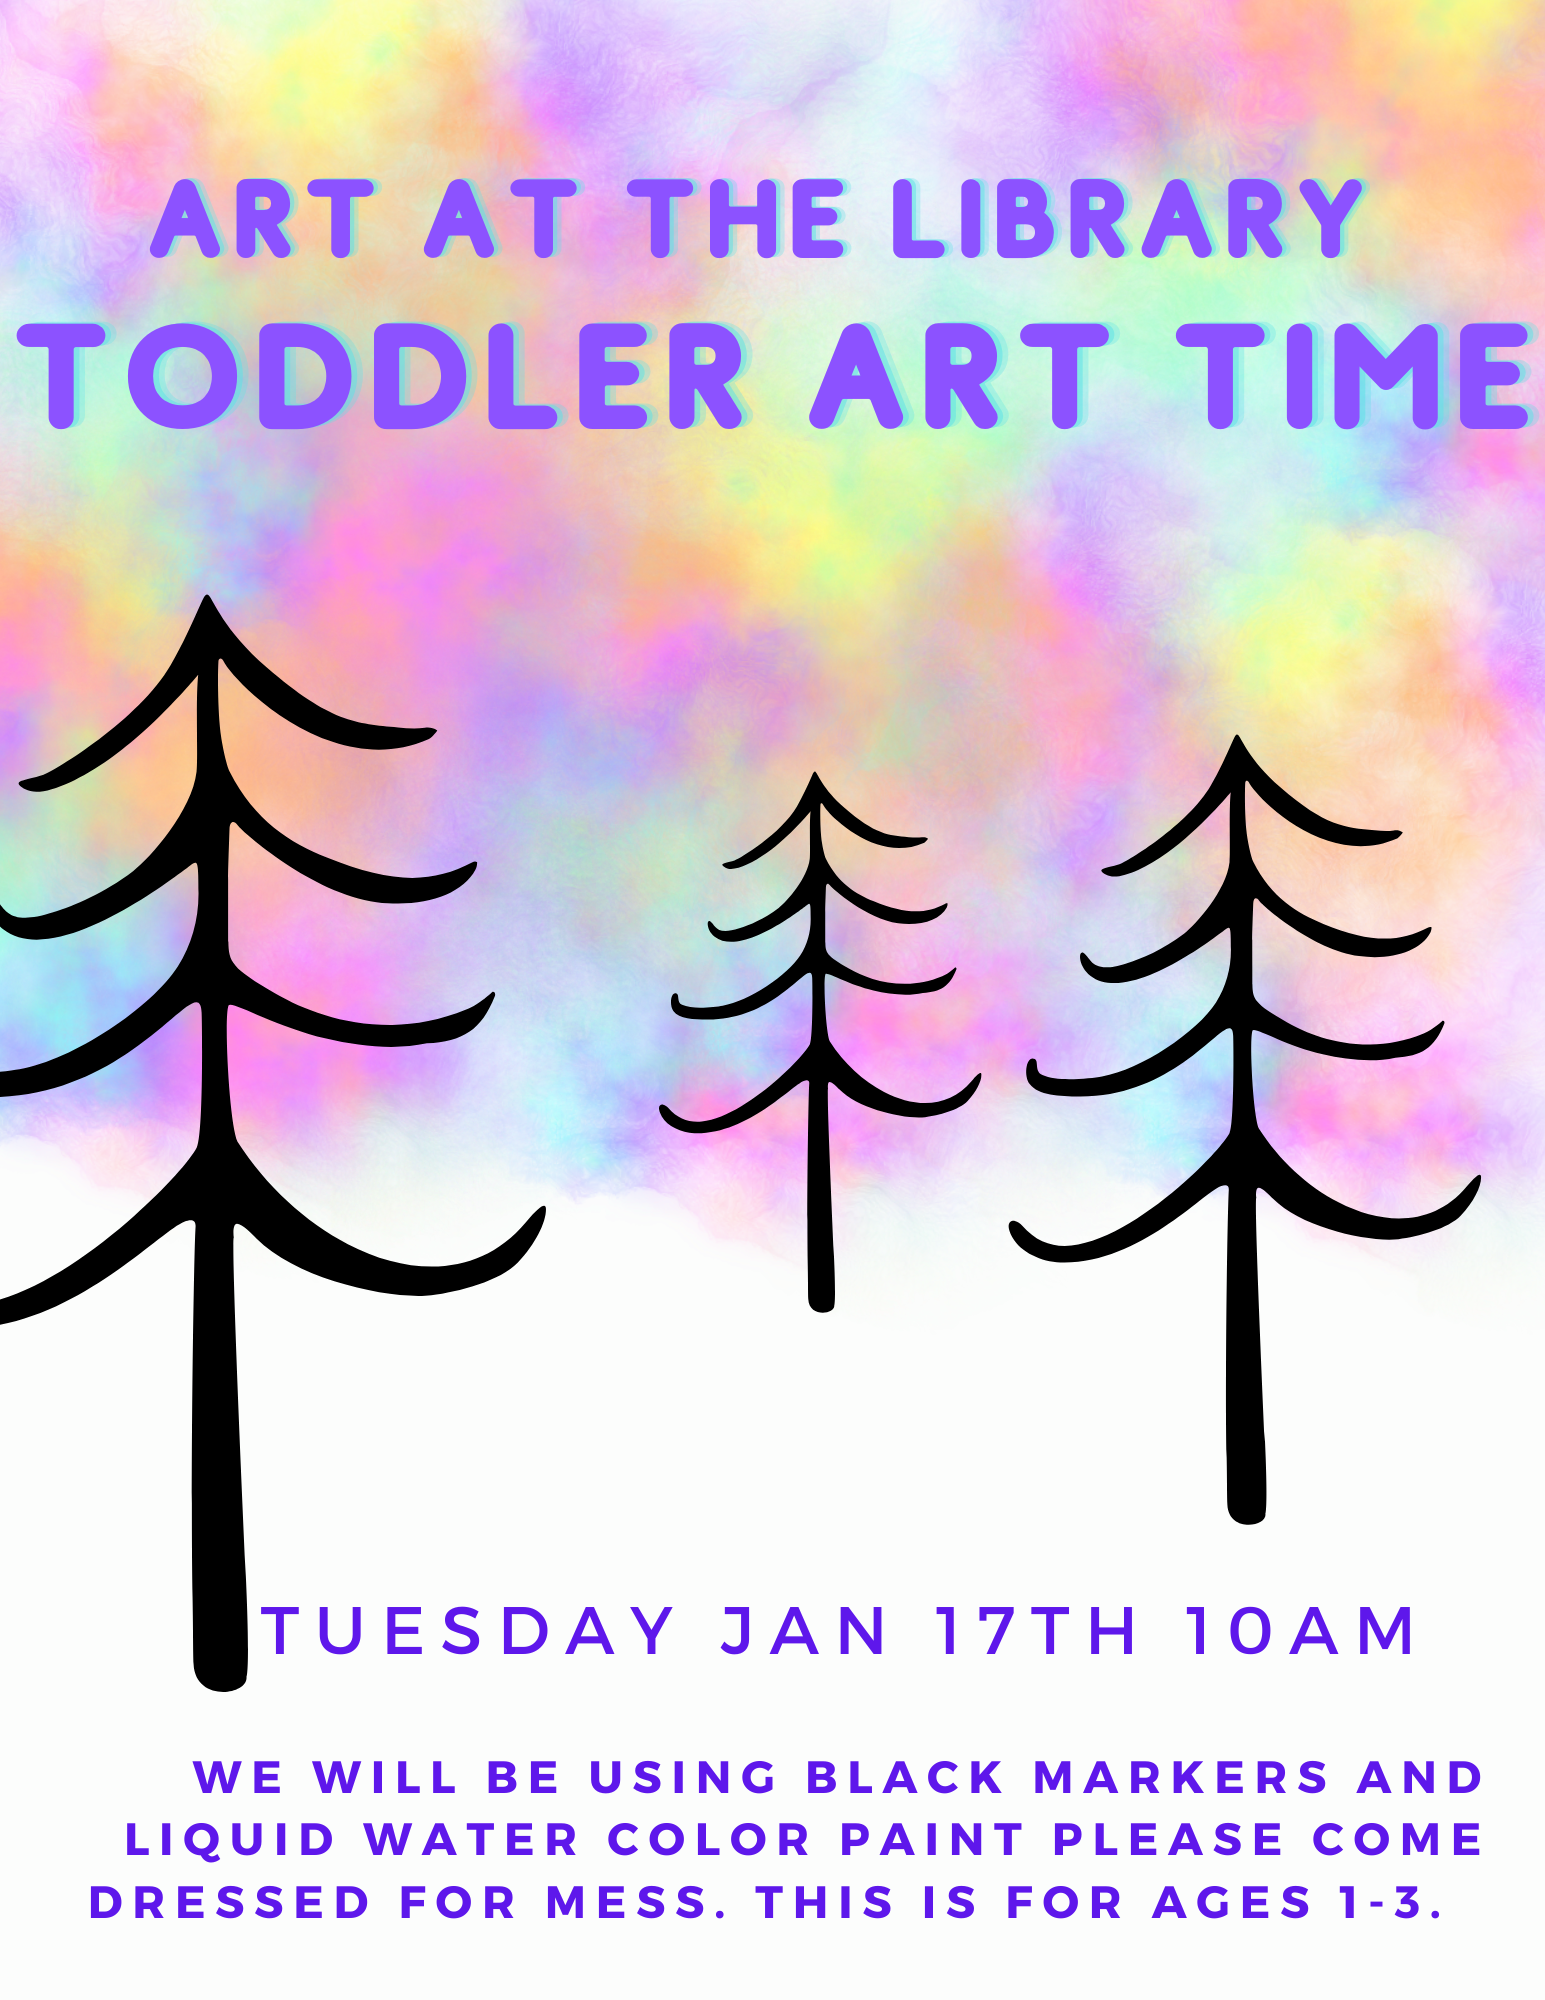 artArt at the Library: Toddler Art Time,  January 17th at 10 a.m.  We will be using liquid water color and marker.  This is a lesson for ages 1-3 years old. 